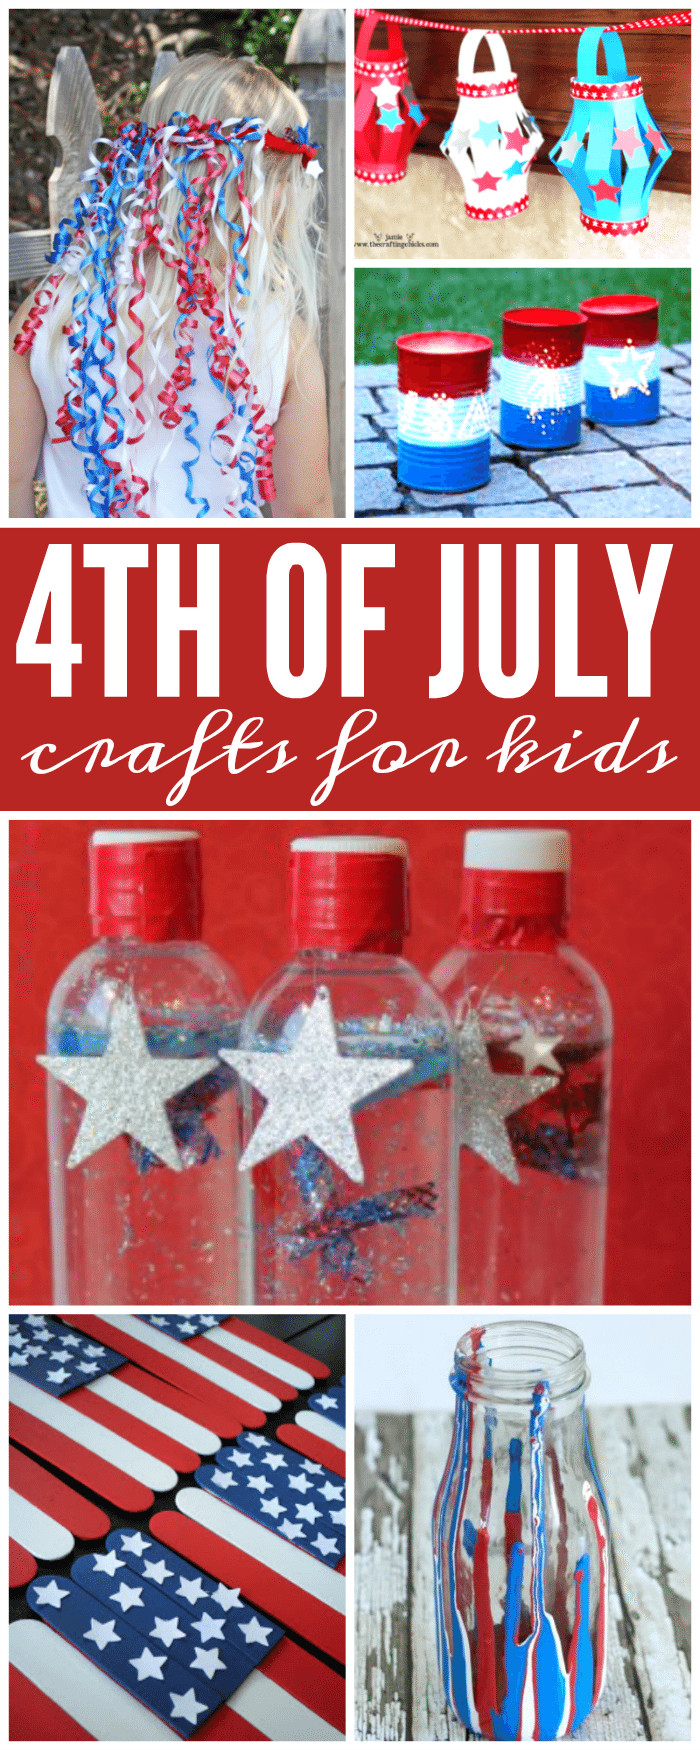 Fourth Of July Crafts
 4th of July Crafts for Kids